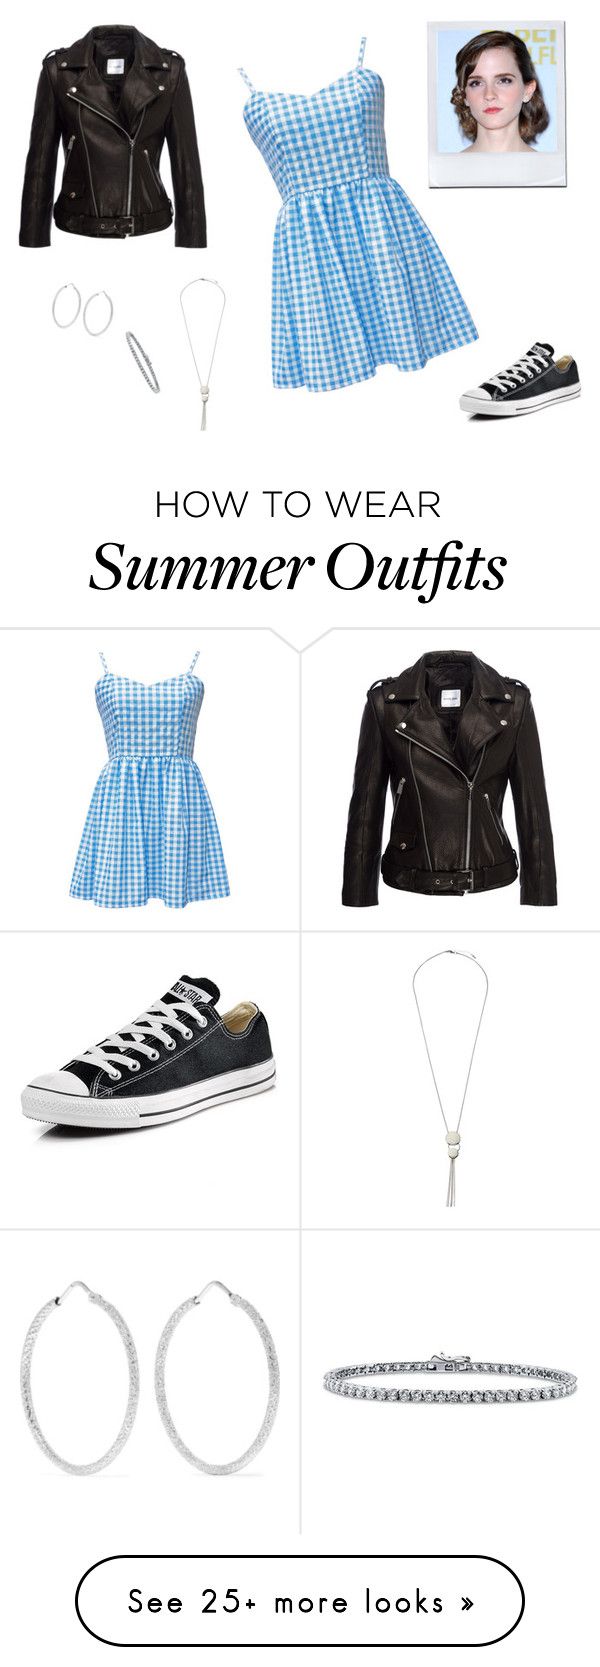 "Penny Hart - Outfit 1" by xviolet7 on Polyvore featuring Converse, An...